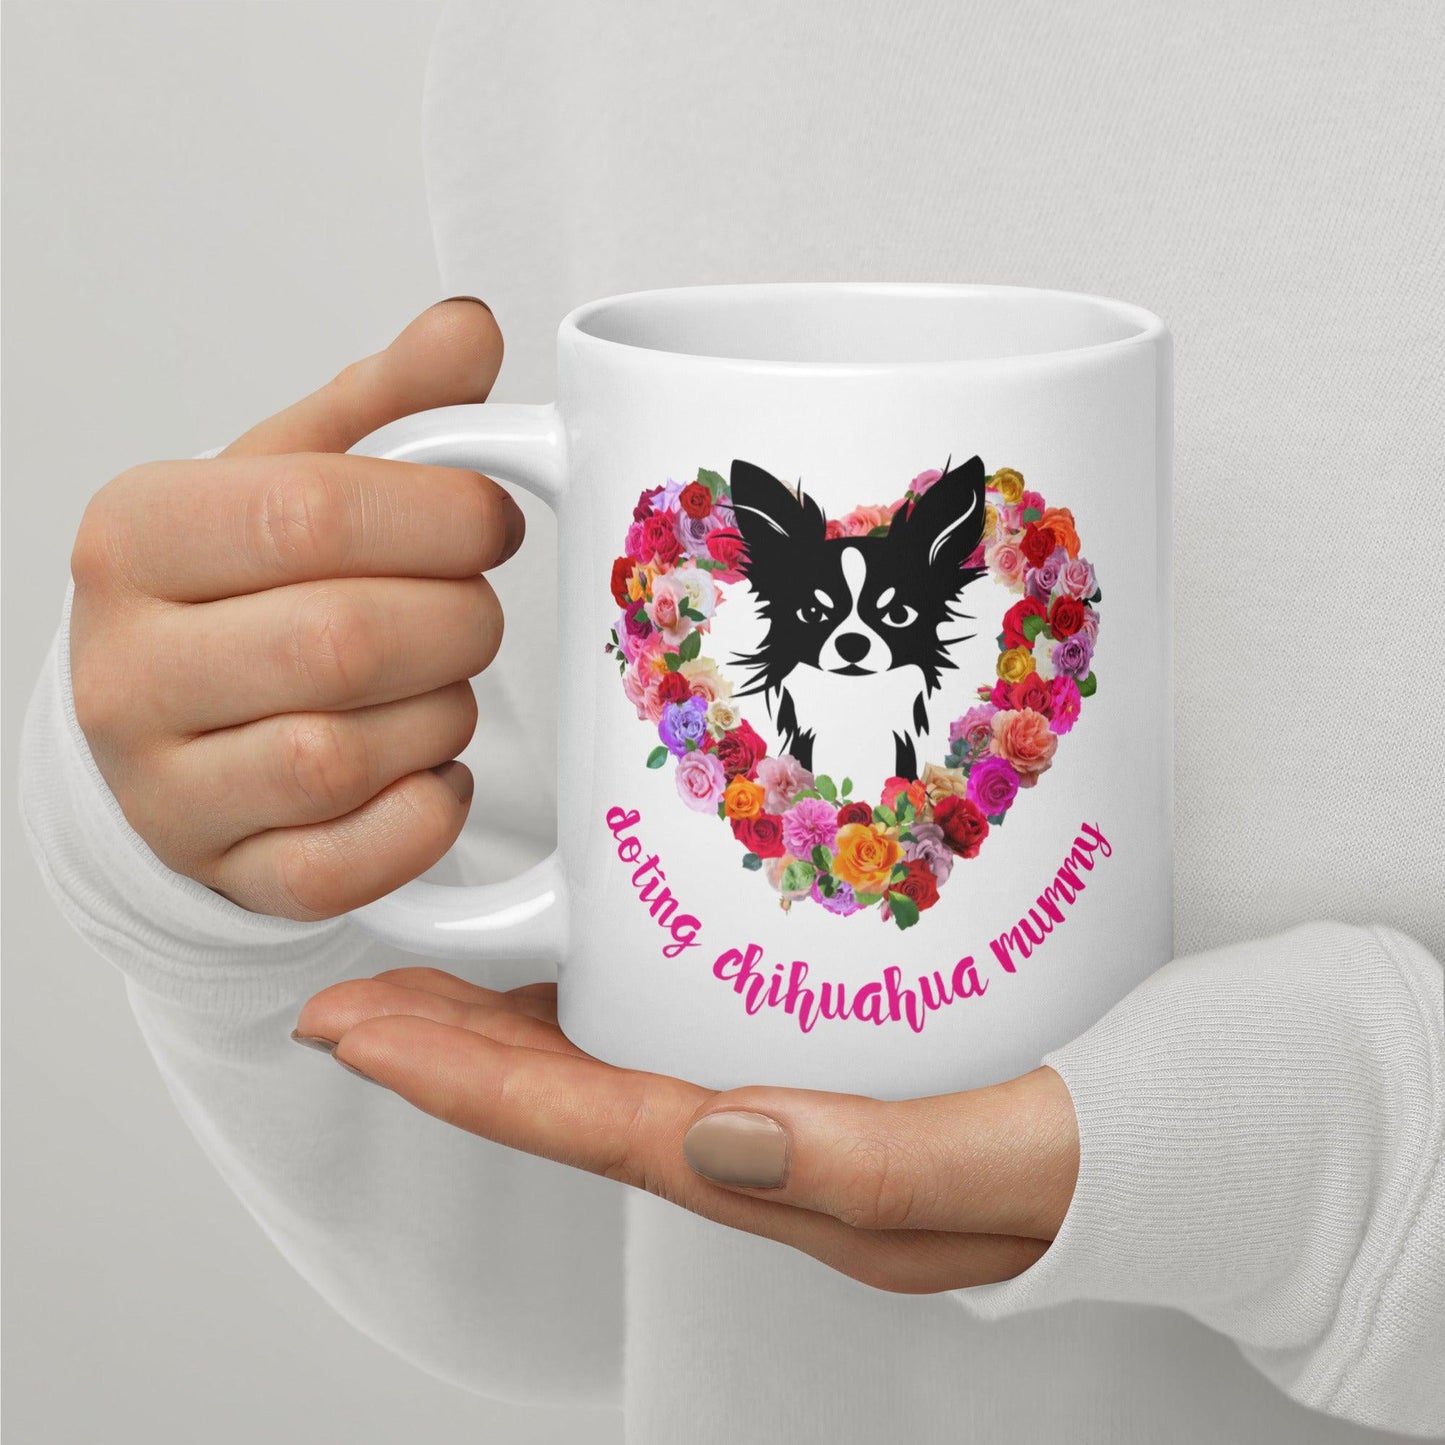 Doting Chihuahua Mummy mug. Available in three sizes. There's something so special about the bond between a girl and her chi baby. These cute little dogs charm their way deep into their mum's heart. This adorable chihuahua and roses mug makes a divine Mother's Day / birthday / Christmas gift for a doting chihuahua mummy. "Aw" guaranteed! Design by Renate Kriegler for Chimigos.